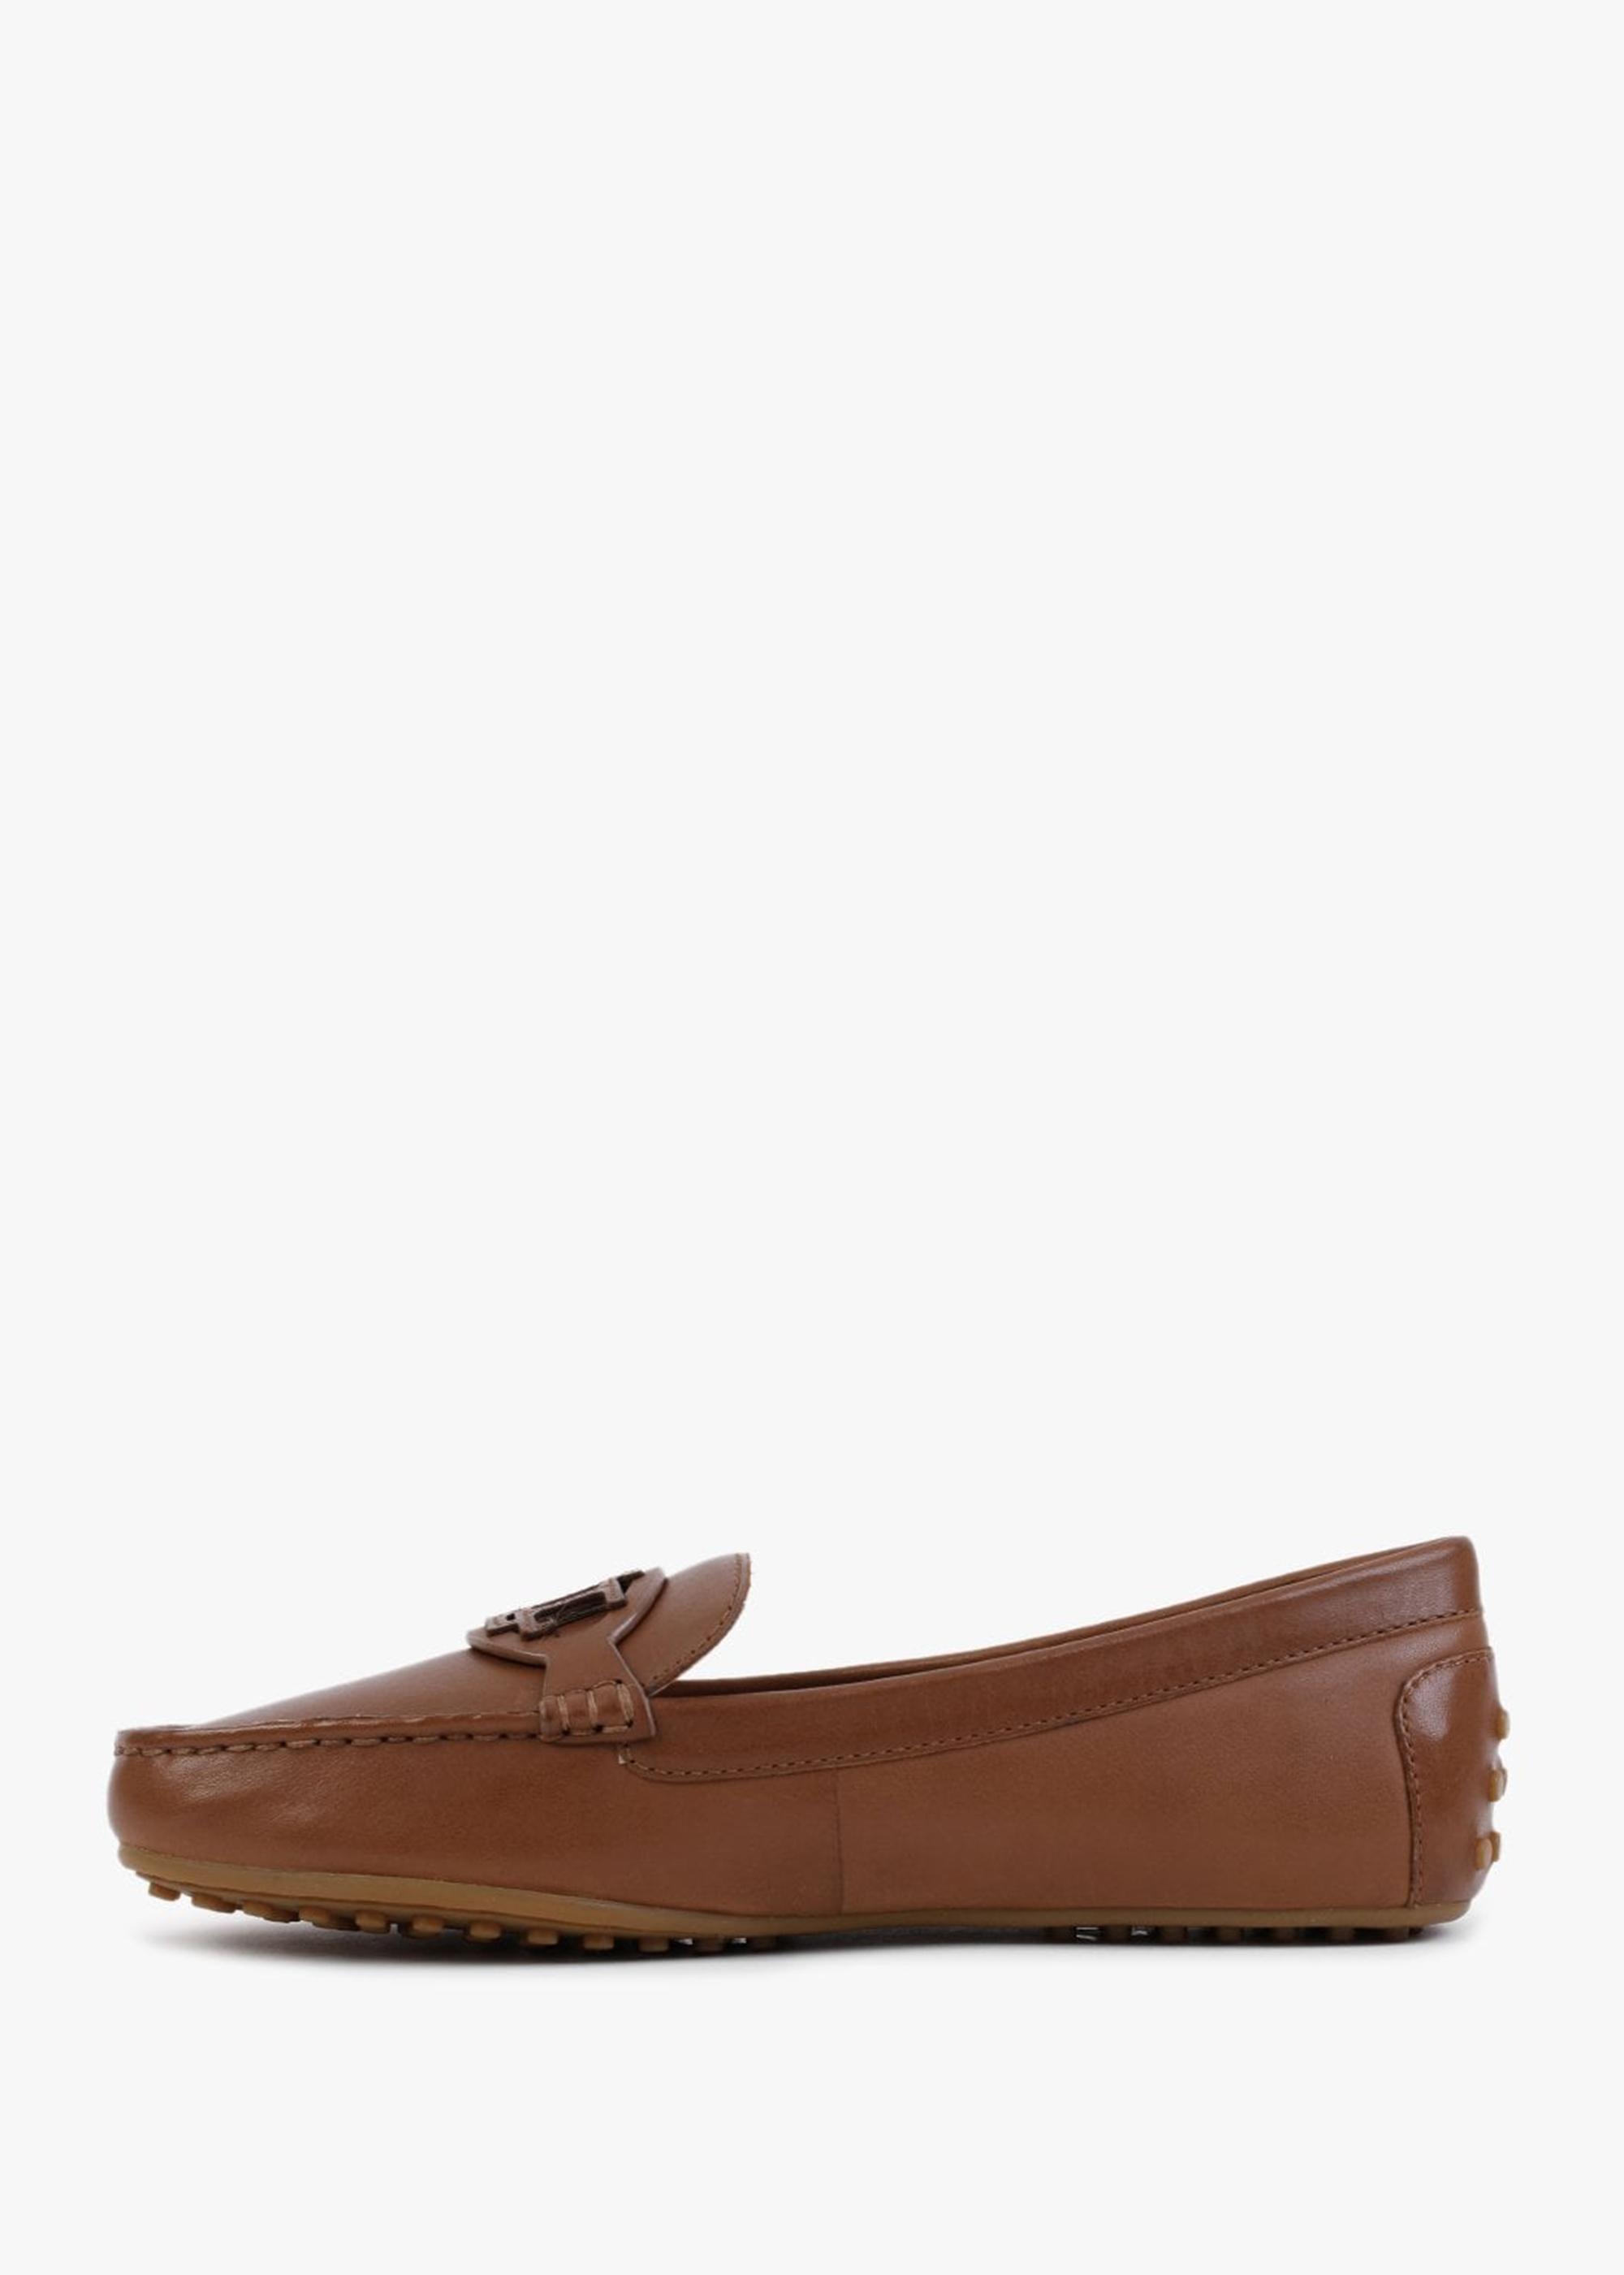 Lauren by Ralph Lauren Brynn Driver Polo Tan Leather Loafers in Brown | Lyst